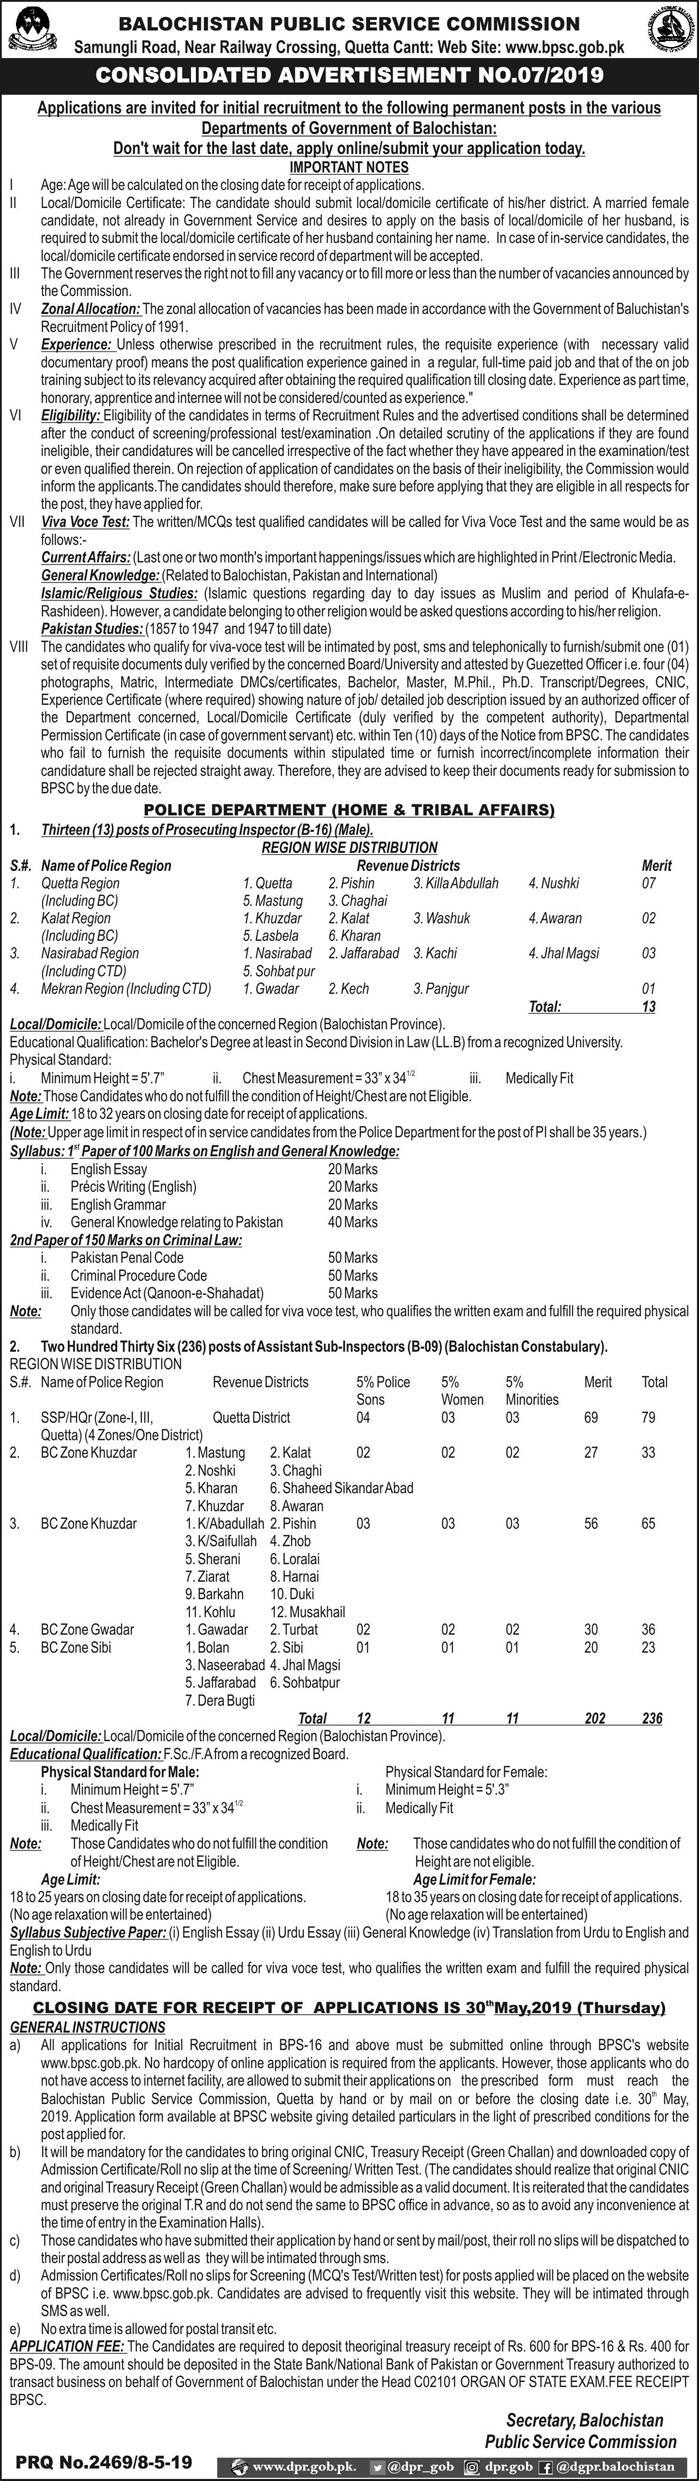 BPSC Jobs 7/2019: 249+ Assistant Sub-Inspectors / ASIs and Prosecuting Inspectors In Balochistan Police Department